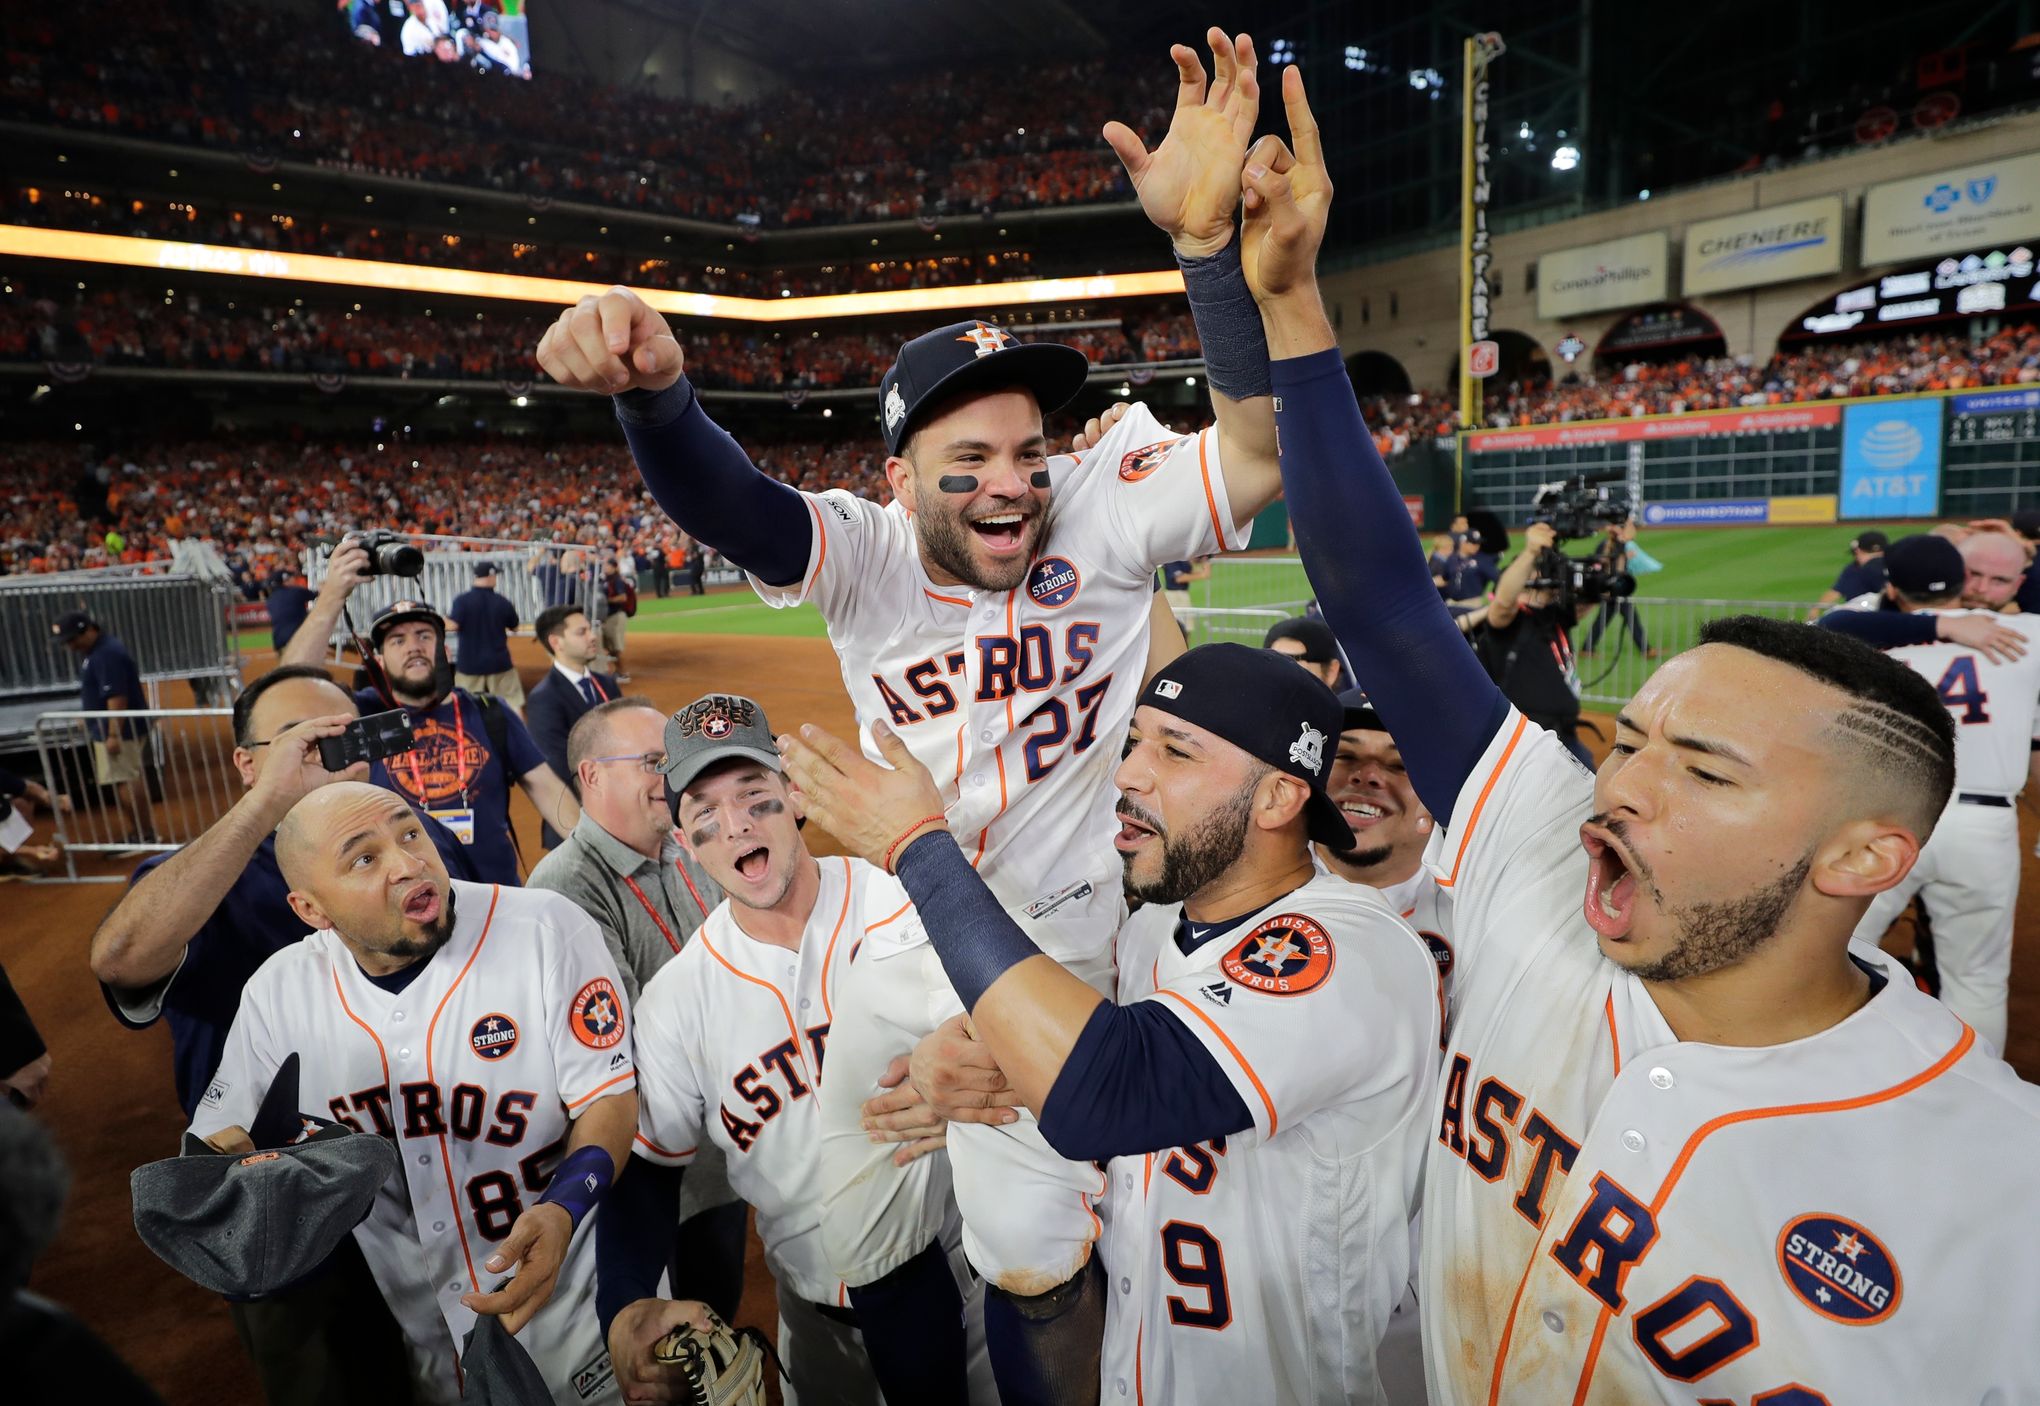 Astros Eliminate Mariners and Advance to ALCS - The New York Times